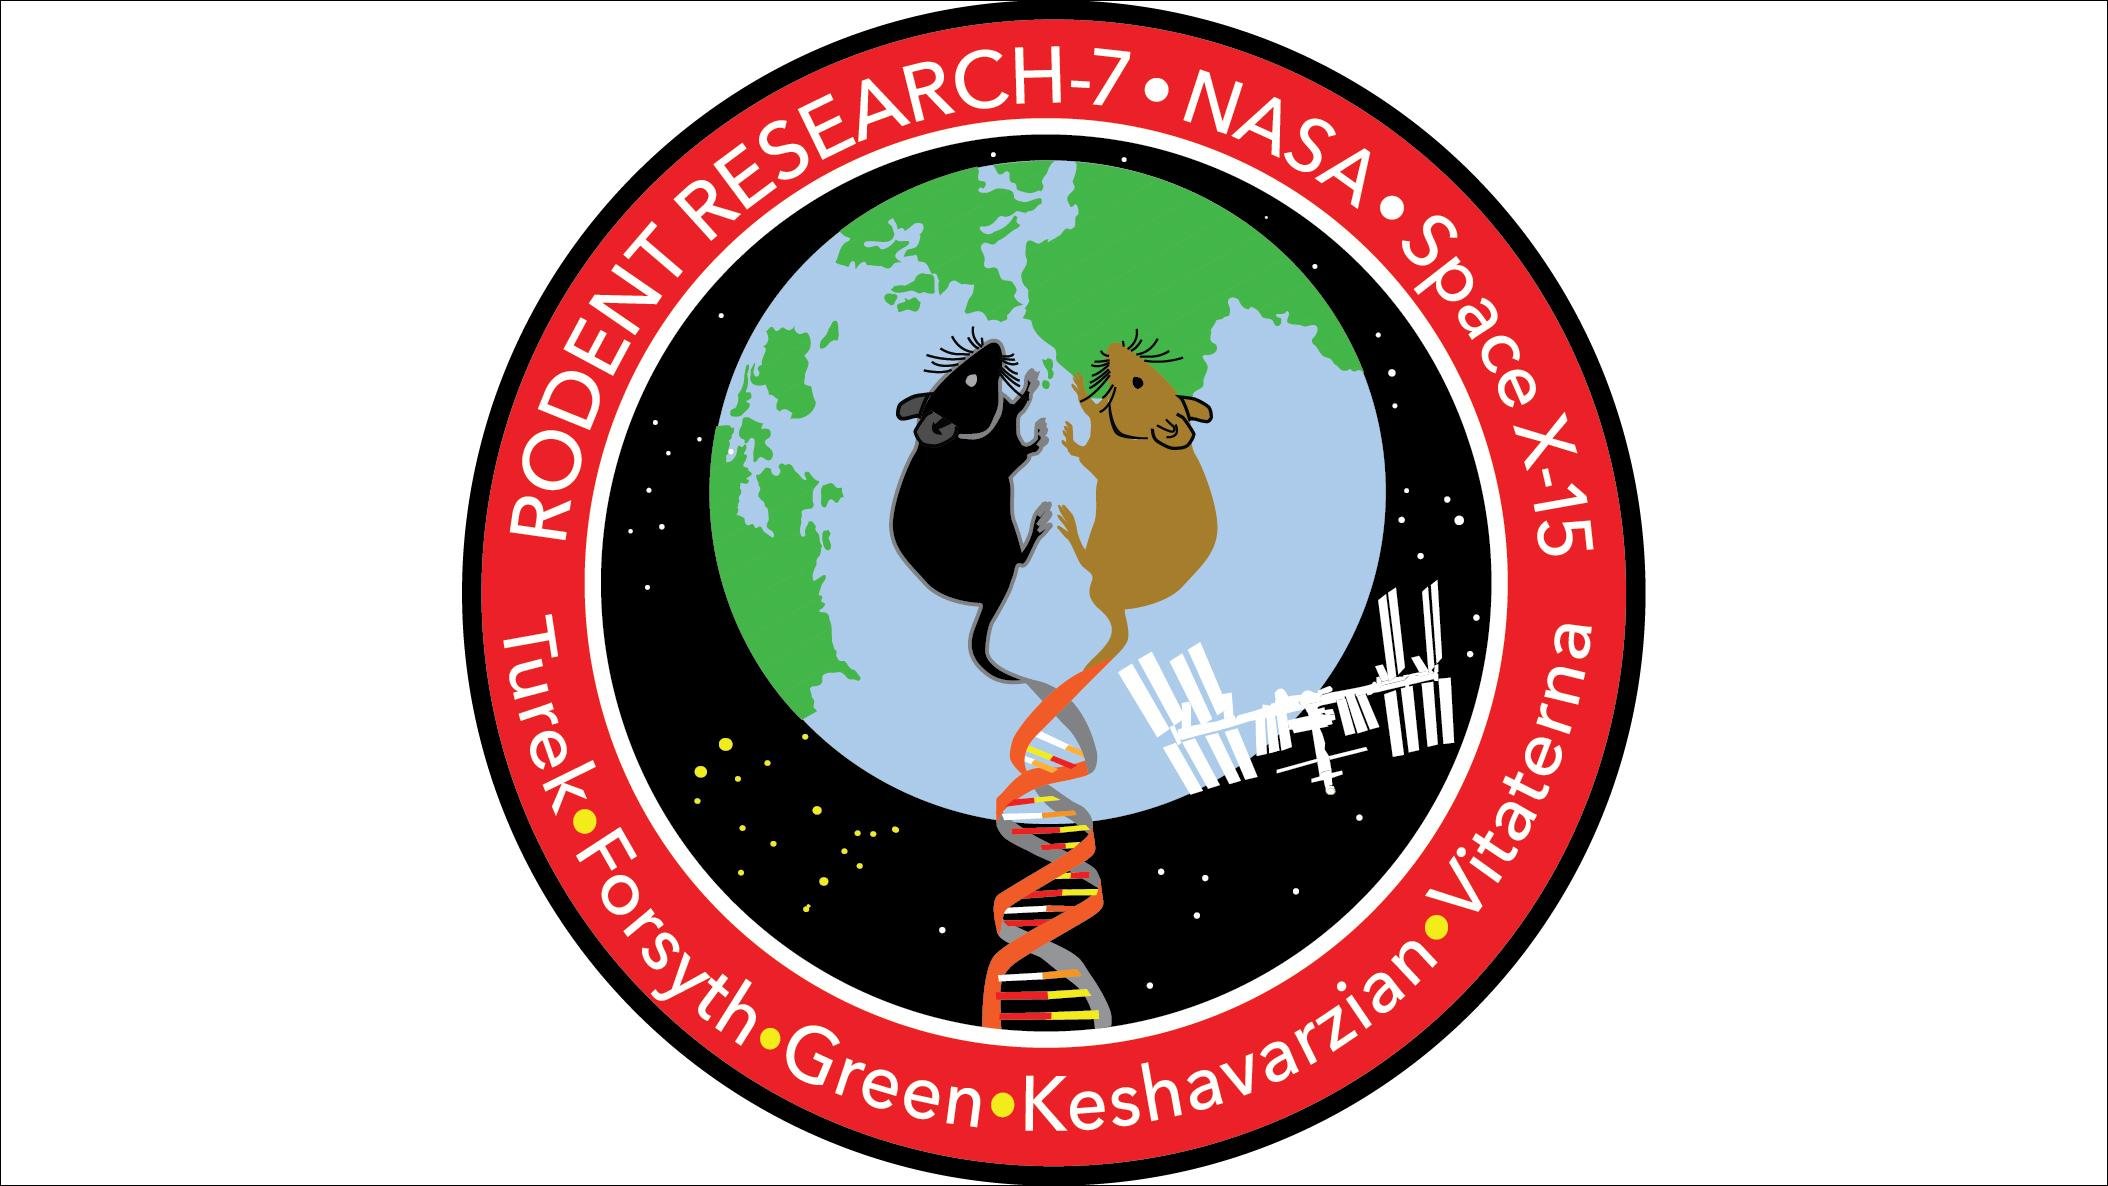 The patch designed by NASA for a Northwestern-led mission to study how space affects the physiology and metabolism of mice. (NASA / Northwestern University)